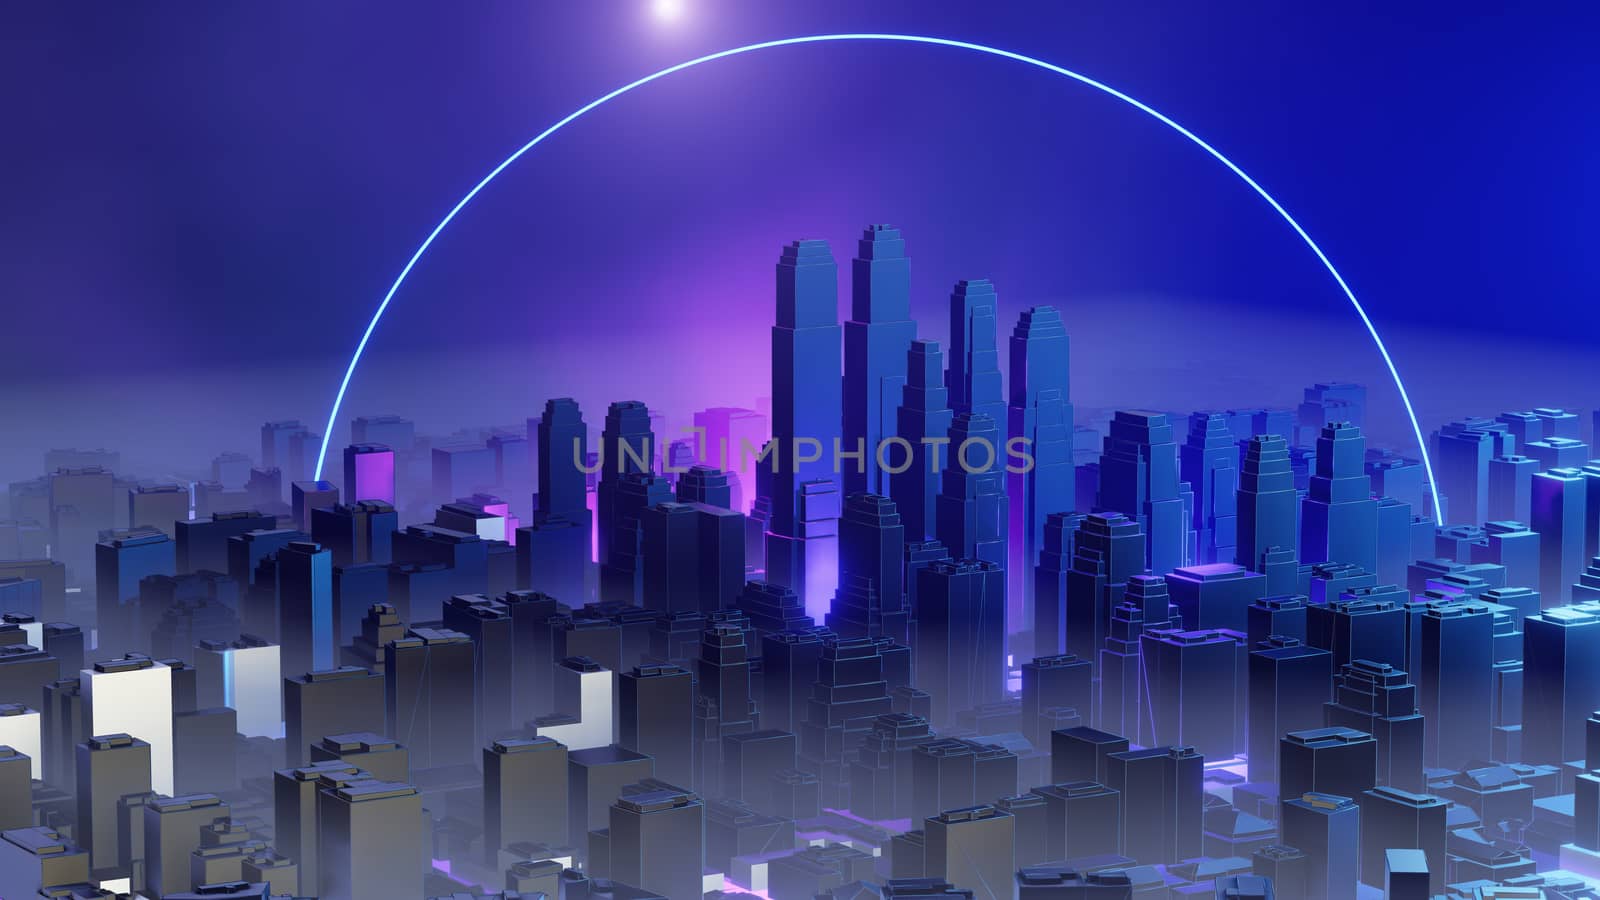 City in fog. Atmospheric emissions or explosion. 3D illustration. Concept of air pollution or military action